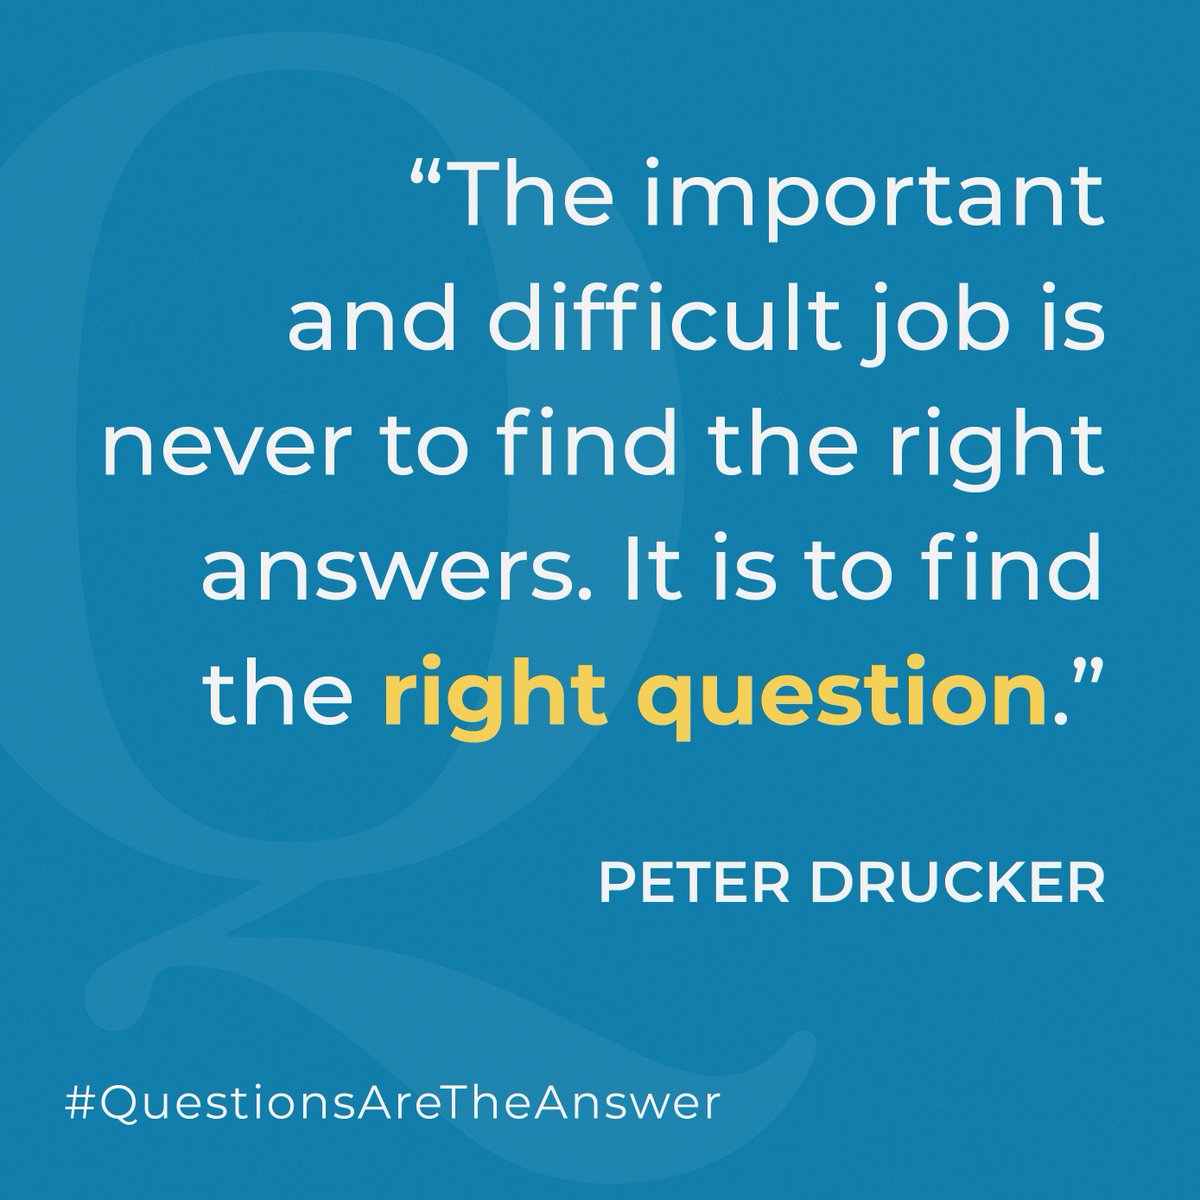 What a privilege it was to explore what the right questions might be for our uncertain times with so many great thinkers and questioners at the @GDruckerForum last week! #GPDF18 #QuestionsAreTheAnswer